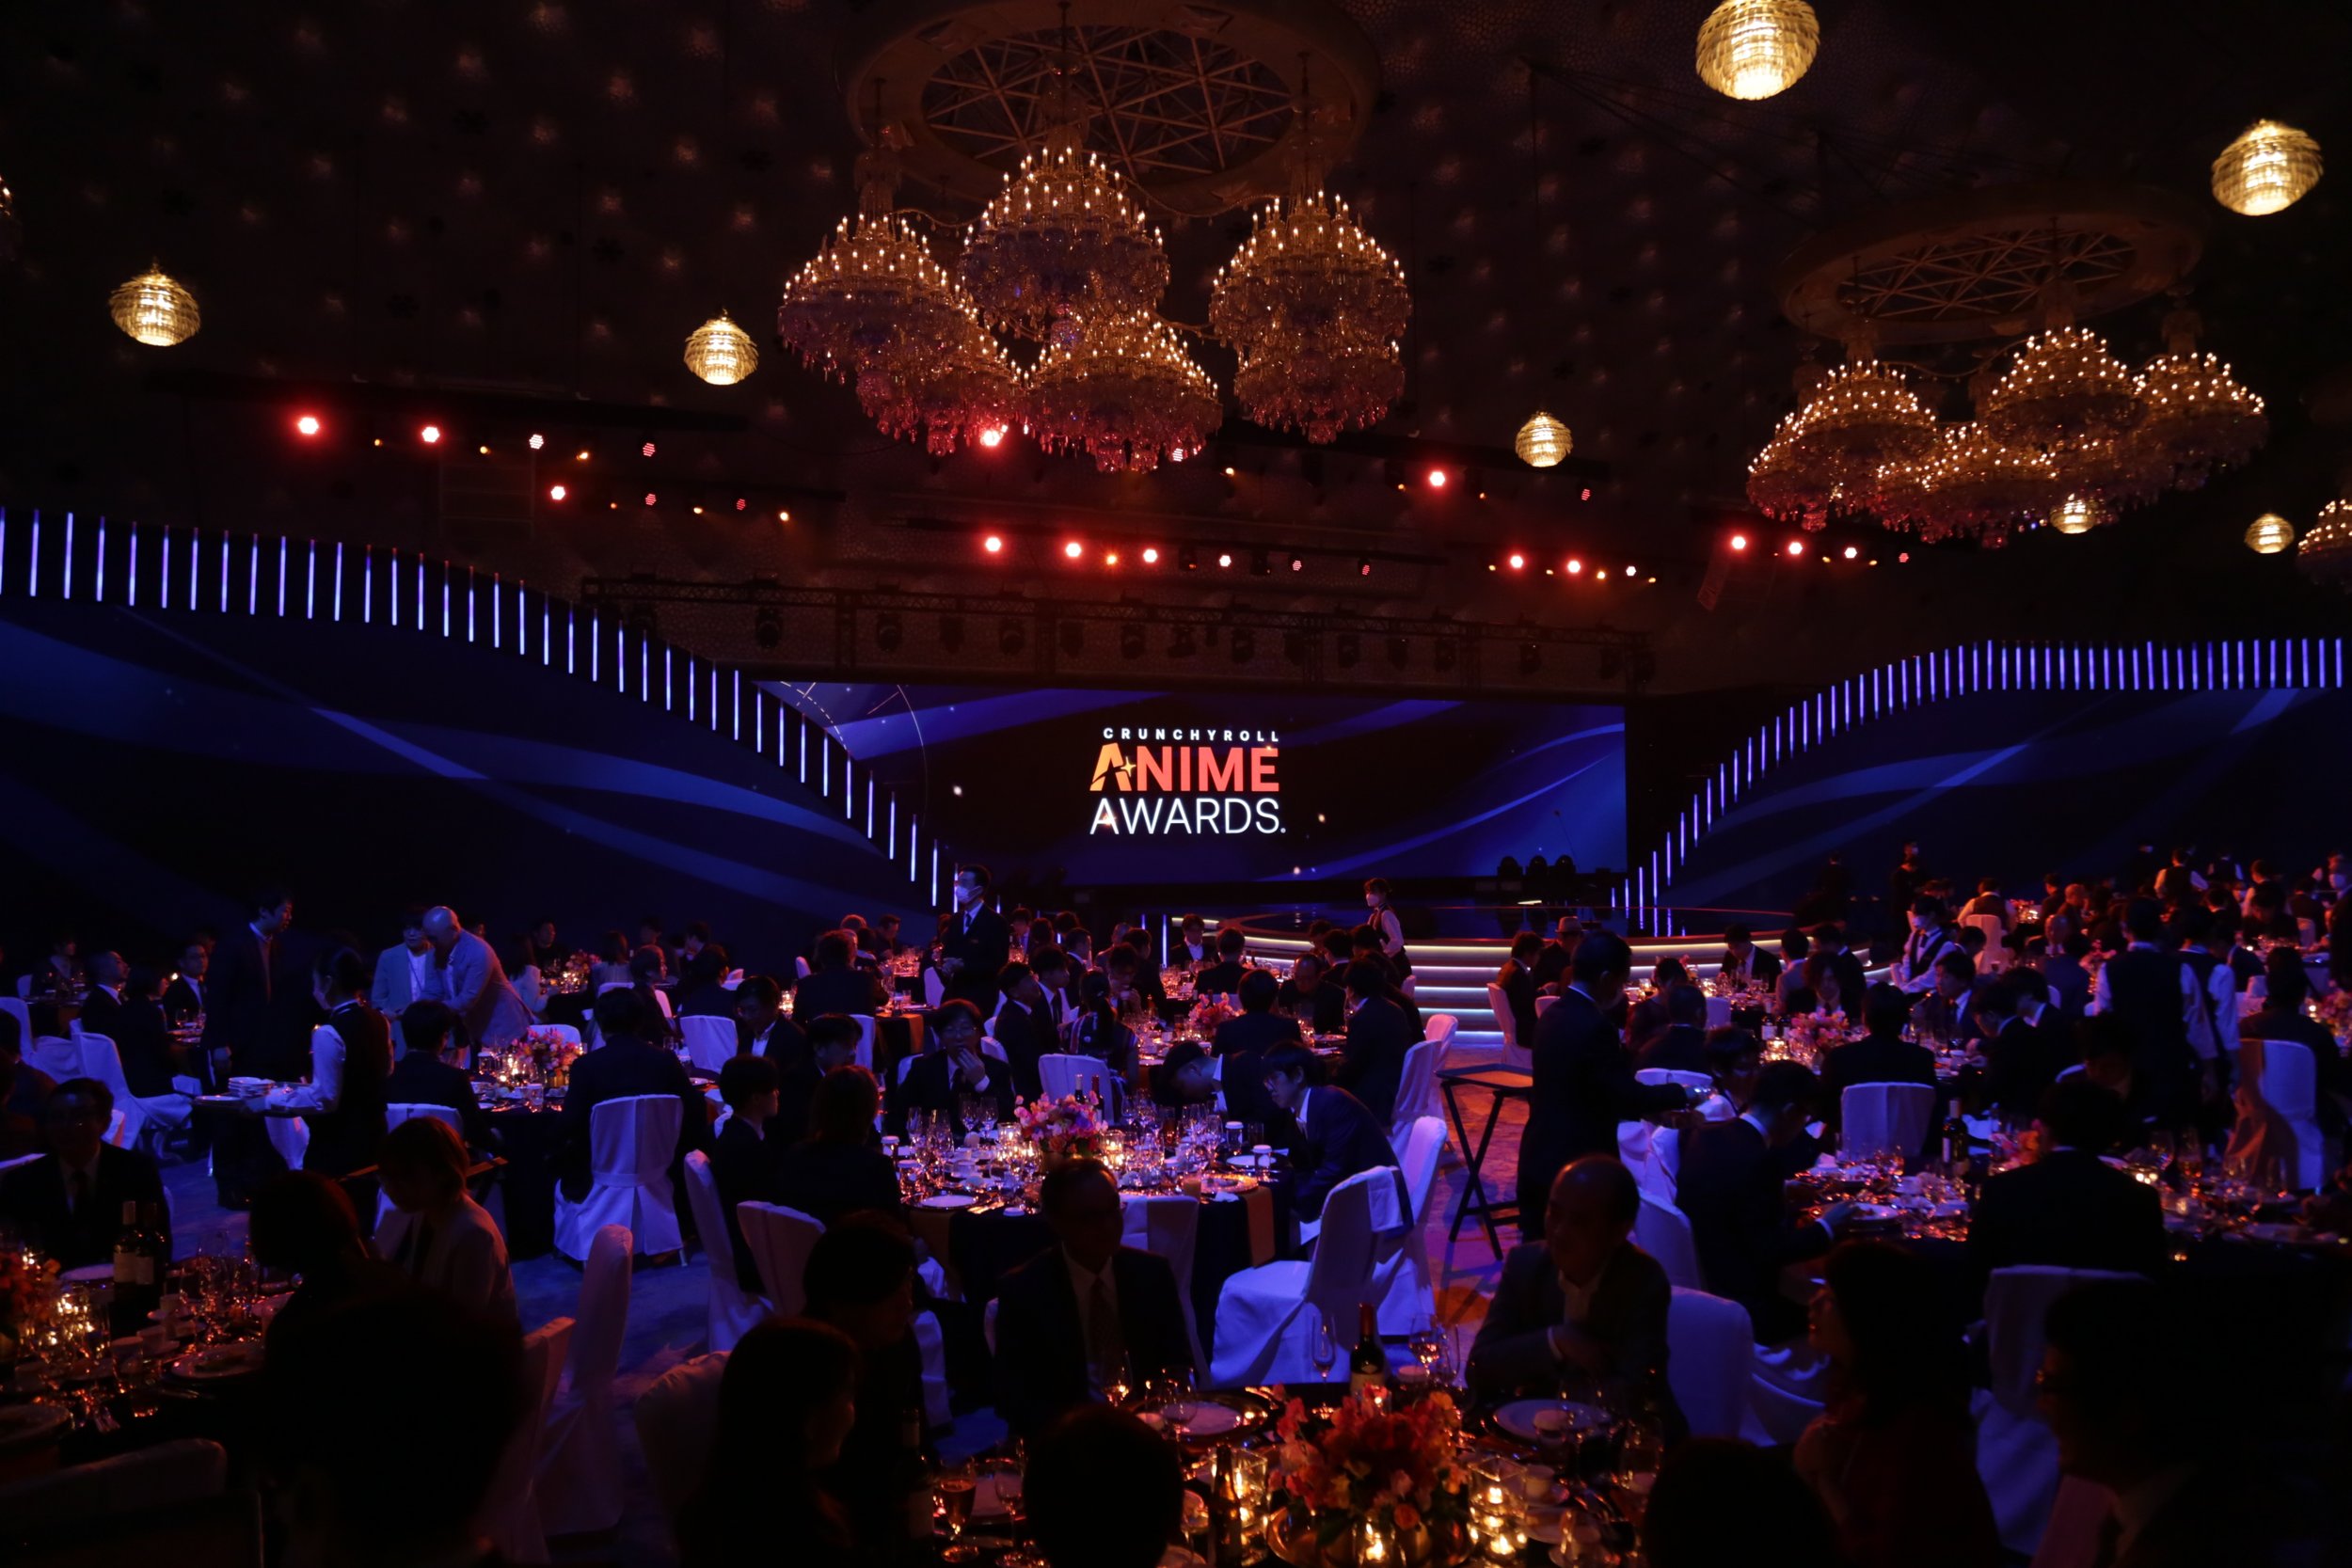 The stage is set for the Crunchyroll Anime Awards 2023 live from Tokyo, Japan on March 4, 2023.JPG